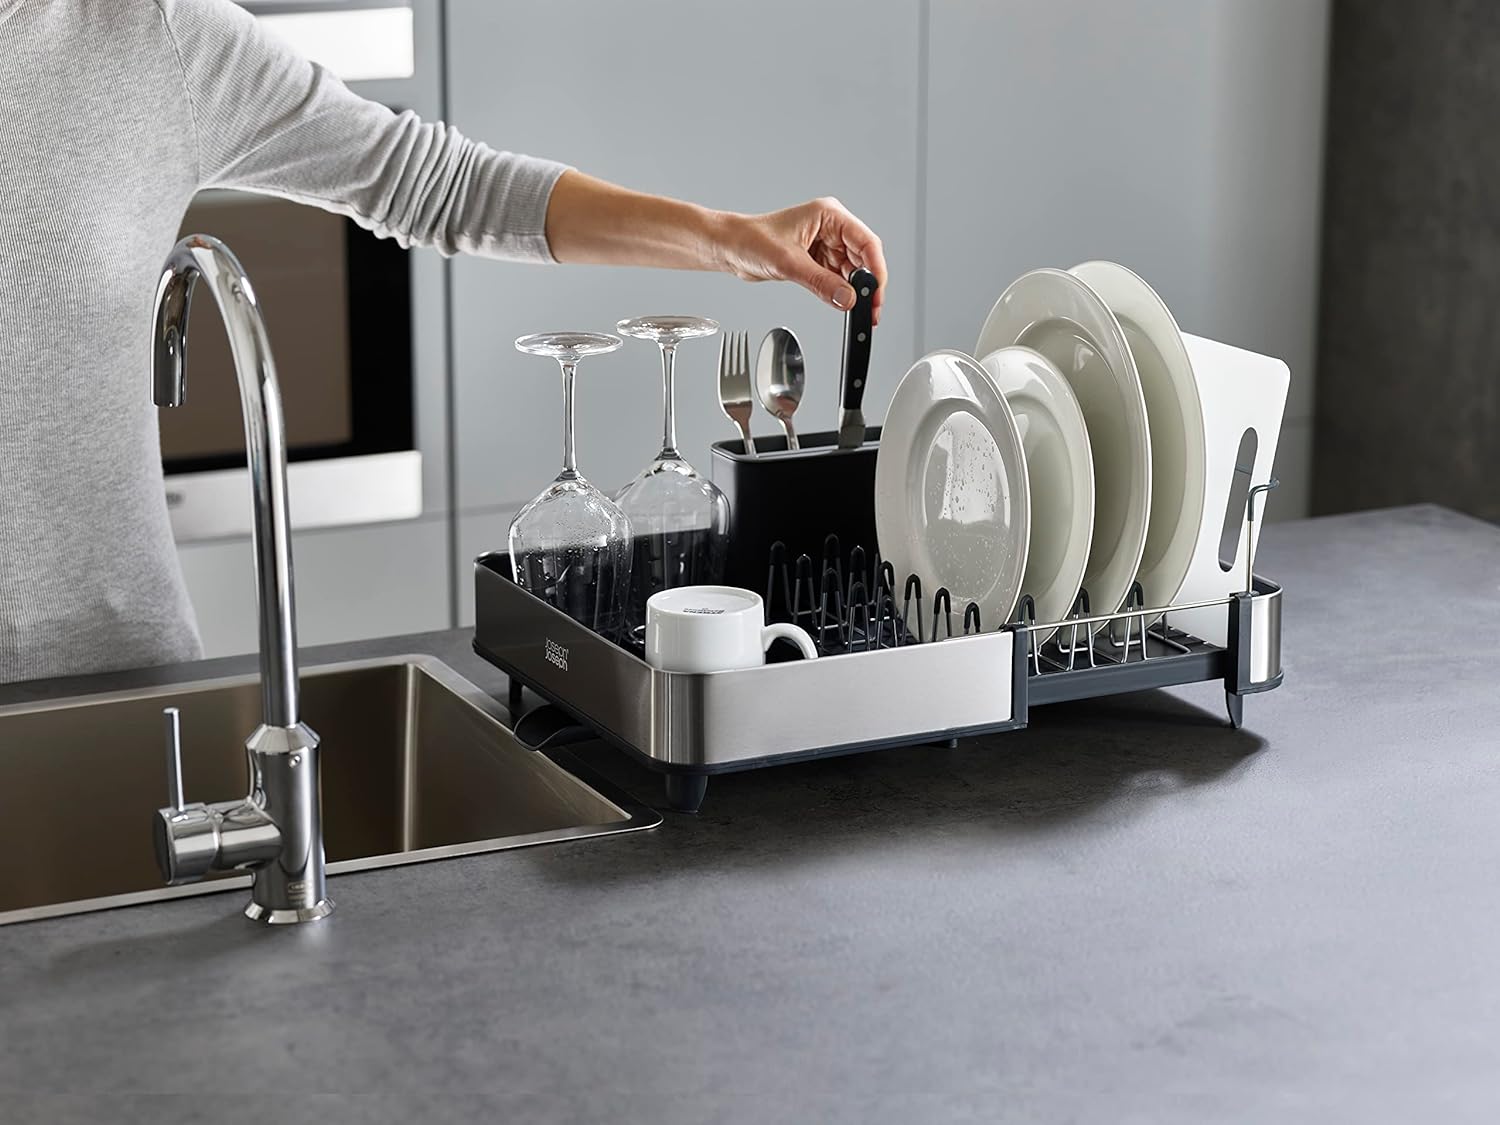 https://bigbigmart.com/wp-content/uploads/2023/10/Joseph-Joseph-Stainless-Steel-Extendable-Dual-Part-Dish-Rack-Non-Scratch-and-Movable-Cutlery-Drainer-and-Drainage-Spout-One-size-Gray2.jpg